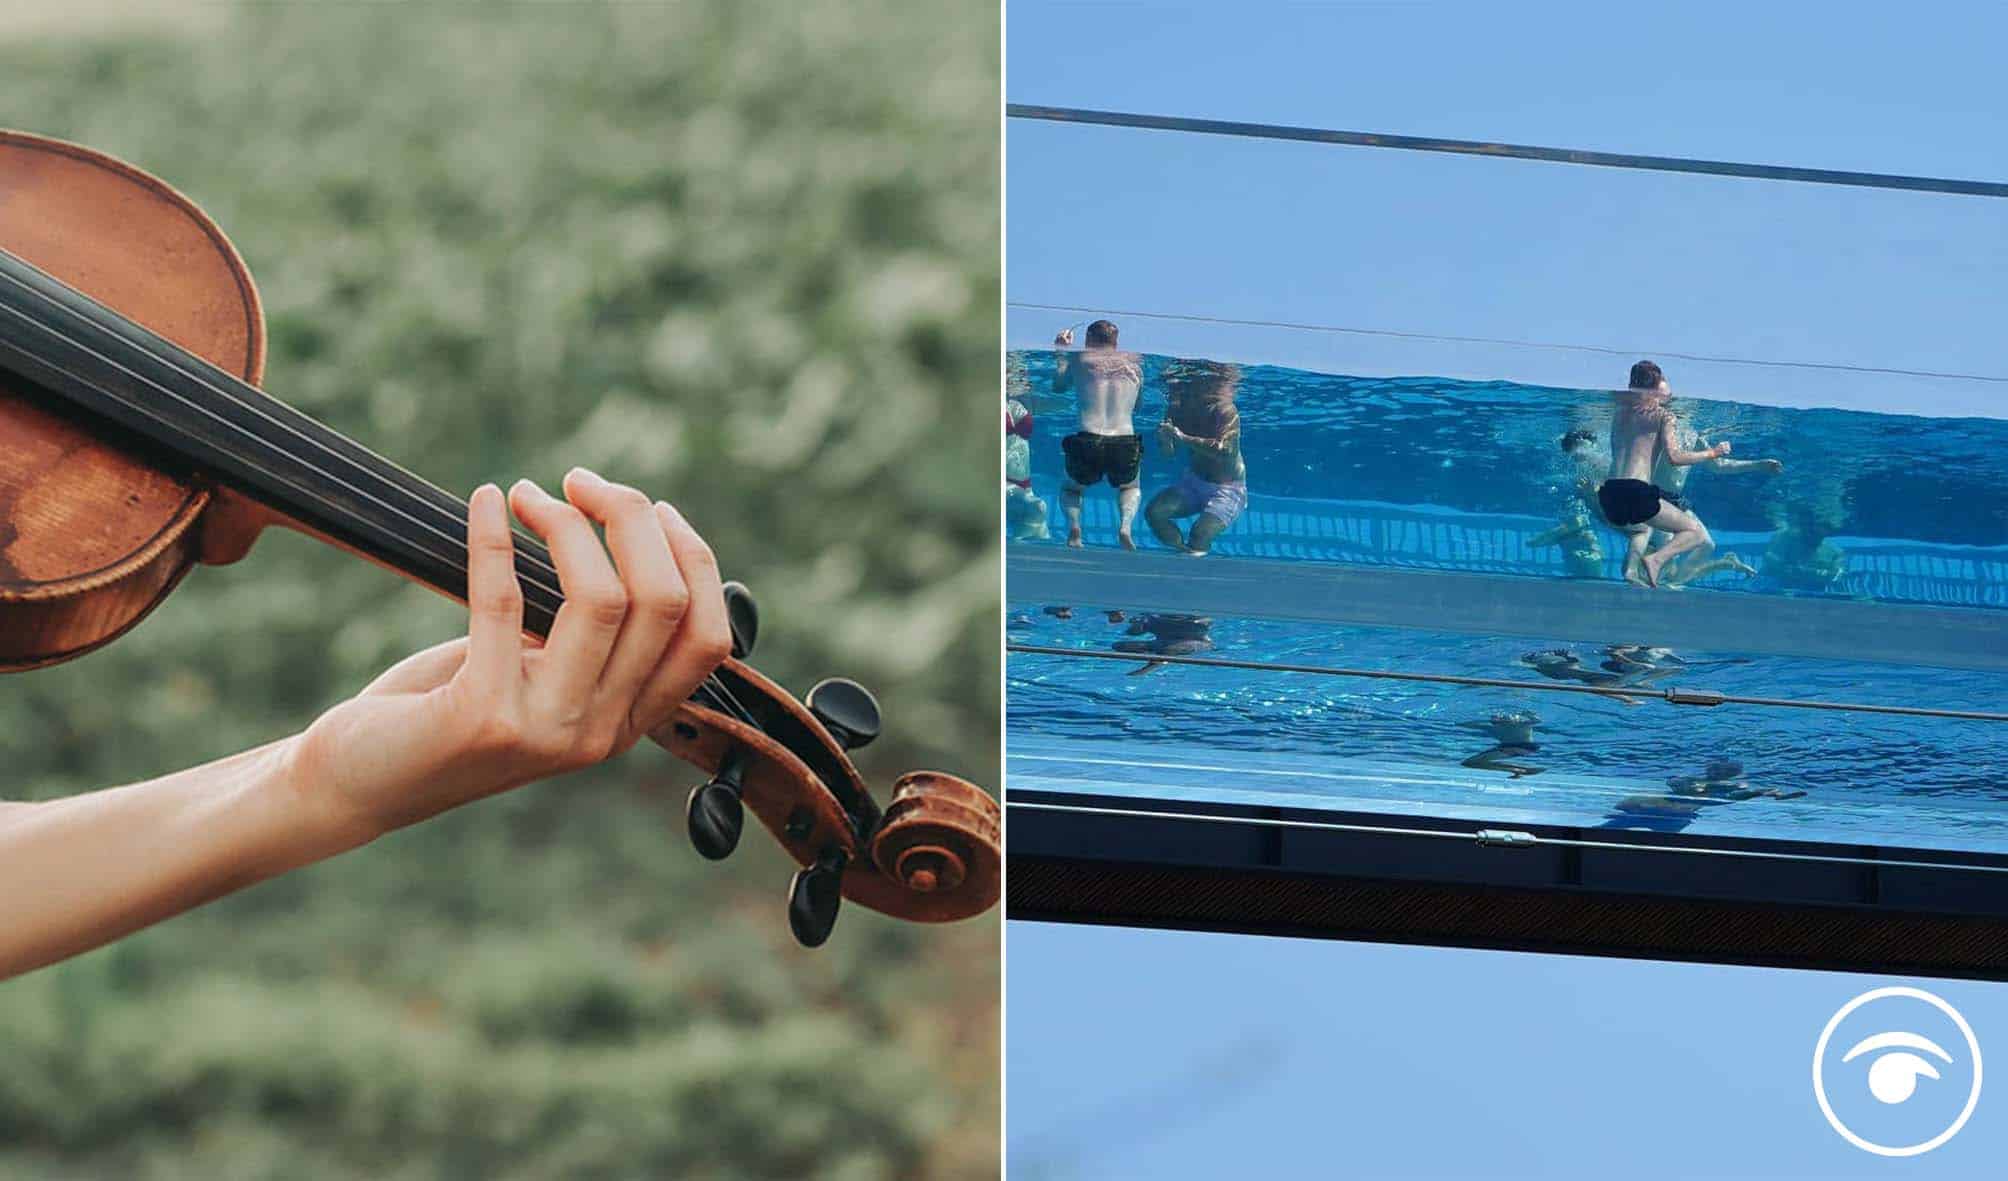 Residents with transparent pool 115ft above ground fuming about costs